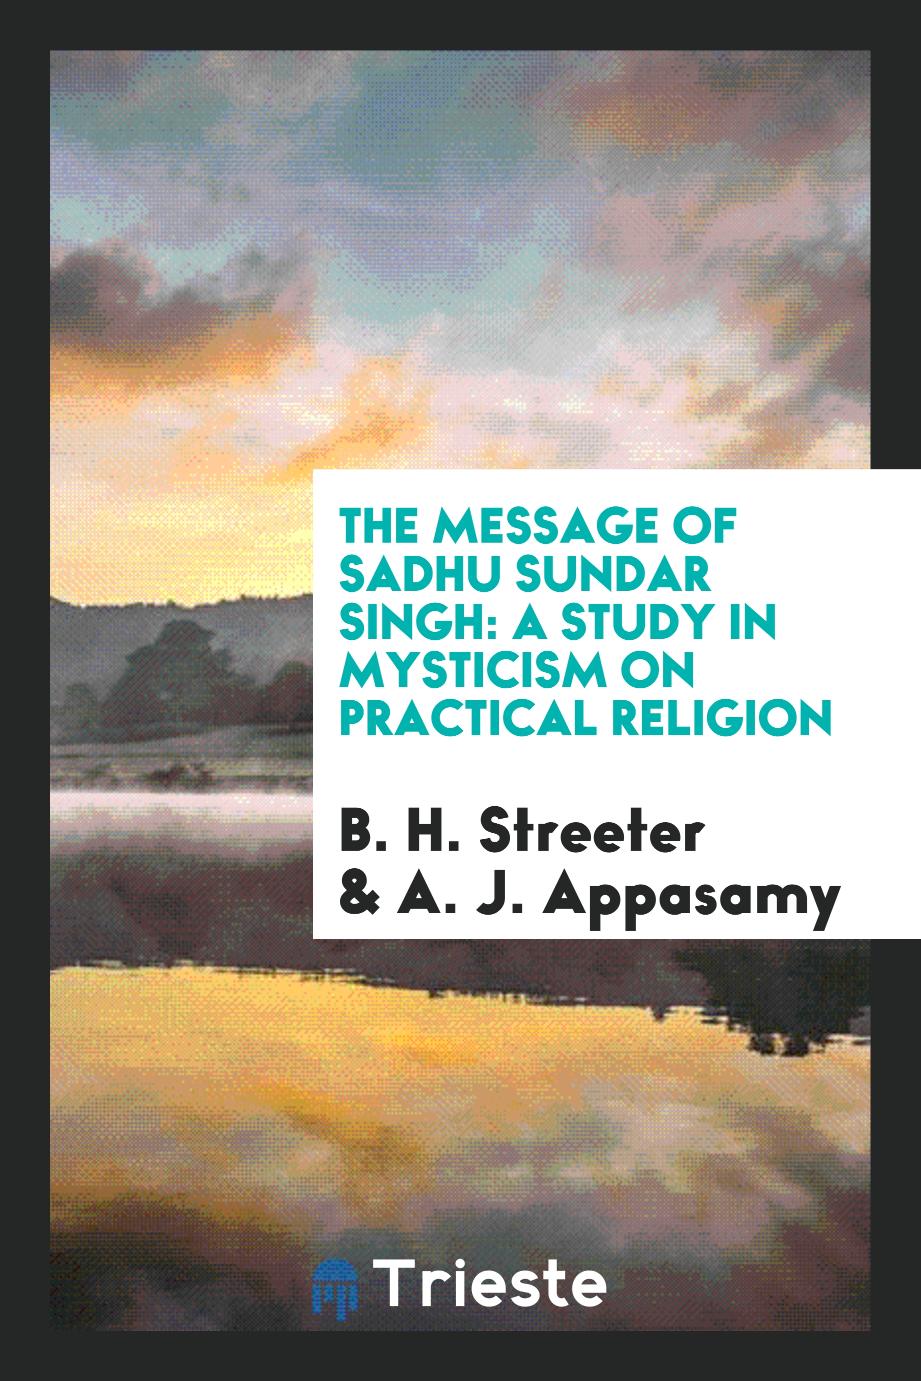 The message of Sadhu Sundar Singh: a study in mysticism on practical religion